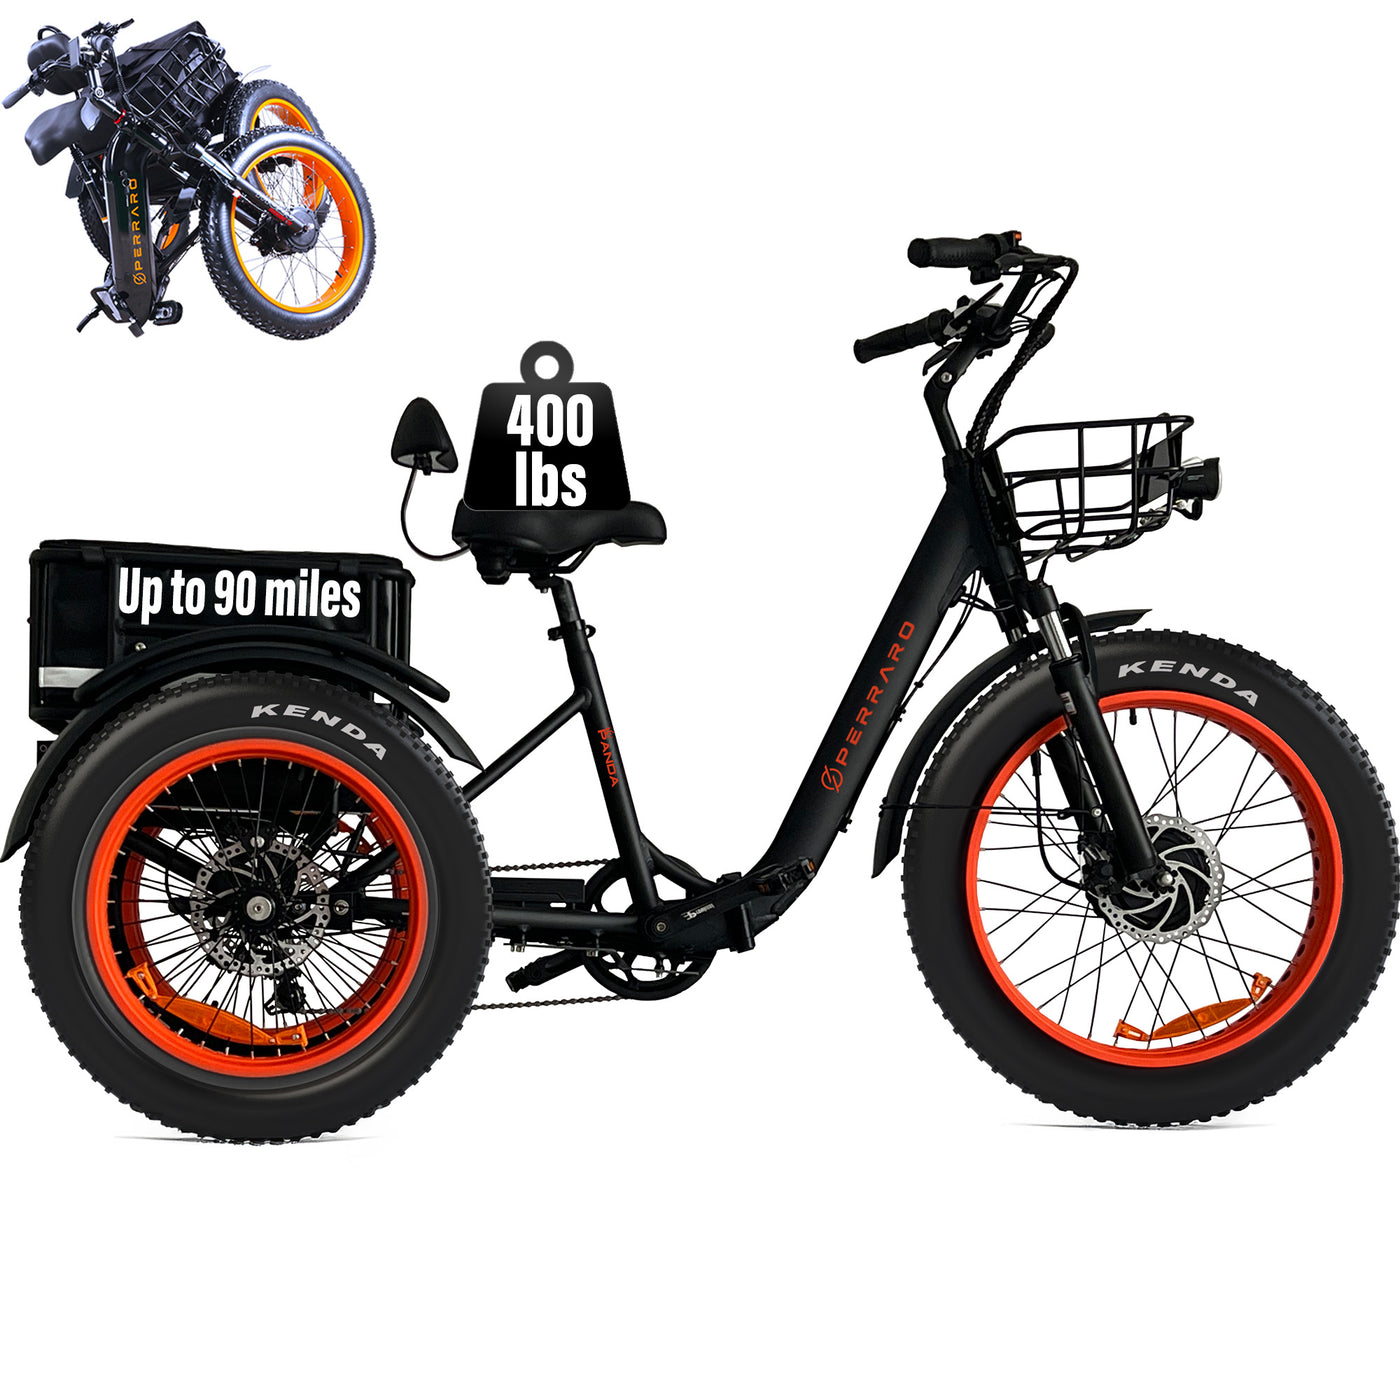 Electric Tricycle for adults - 90 Miles Long Range Trike - 21 AH Samsung Battery - 750W Motor - Foldable - Black Malisa Mobility